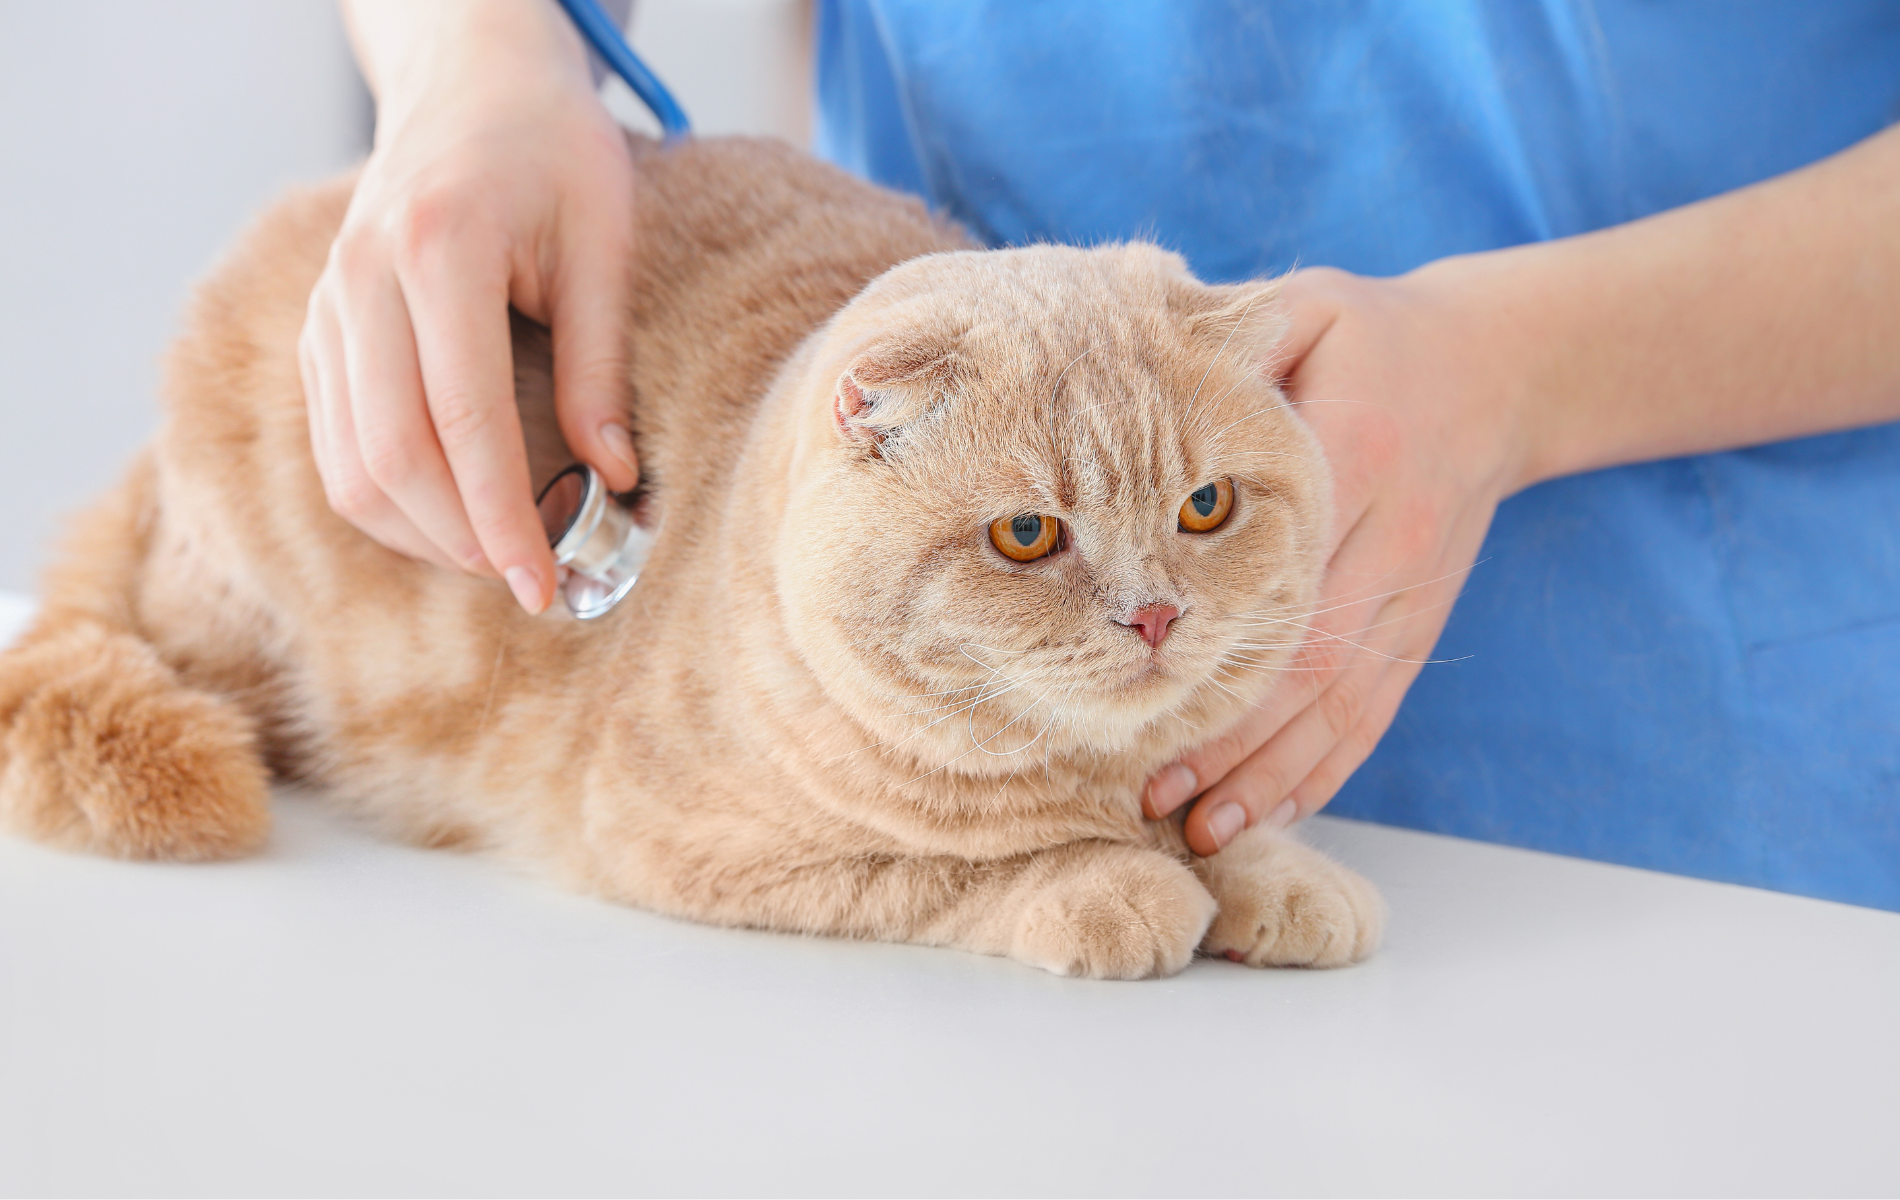 A person using a stethoscope to check the cat heartbeat